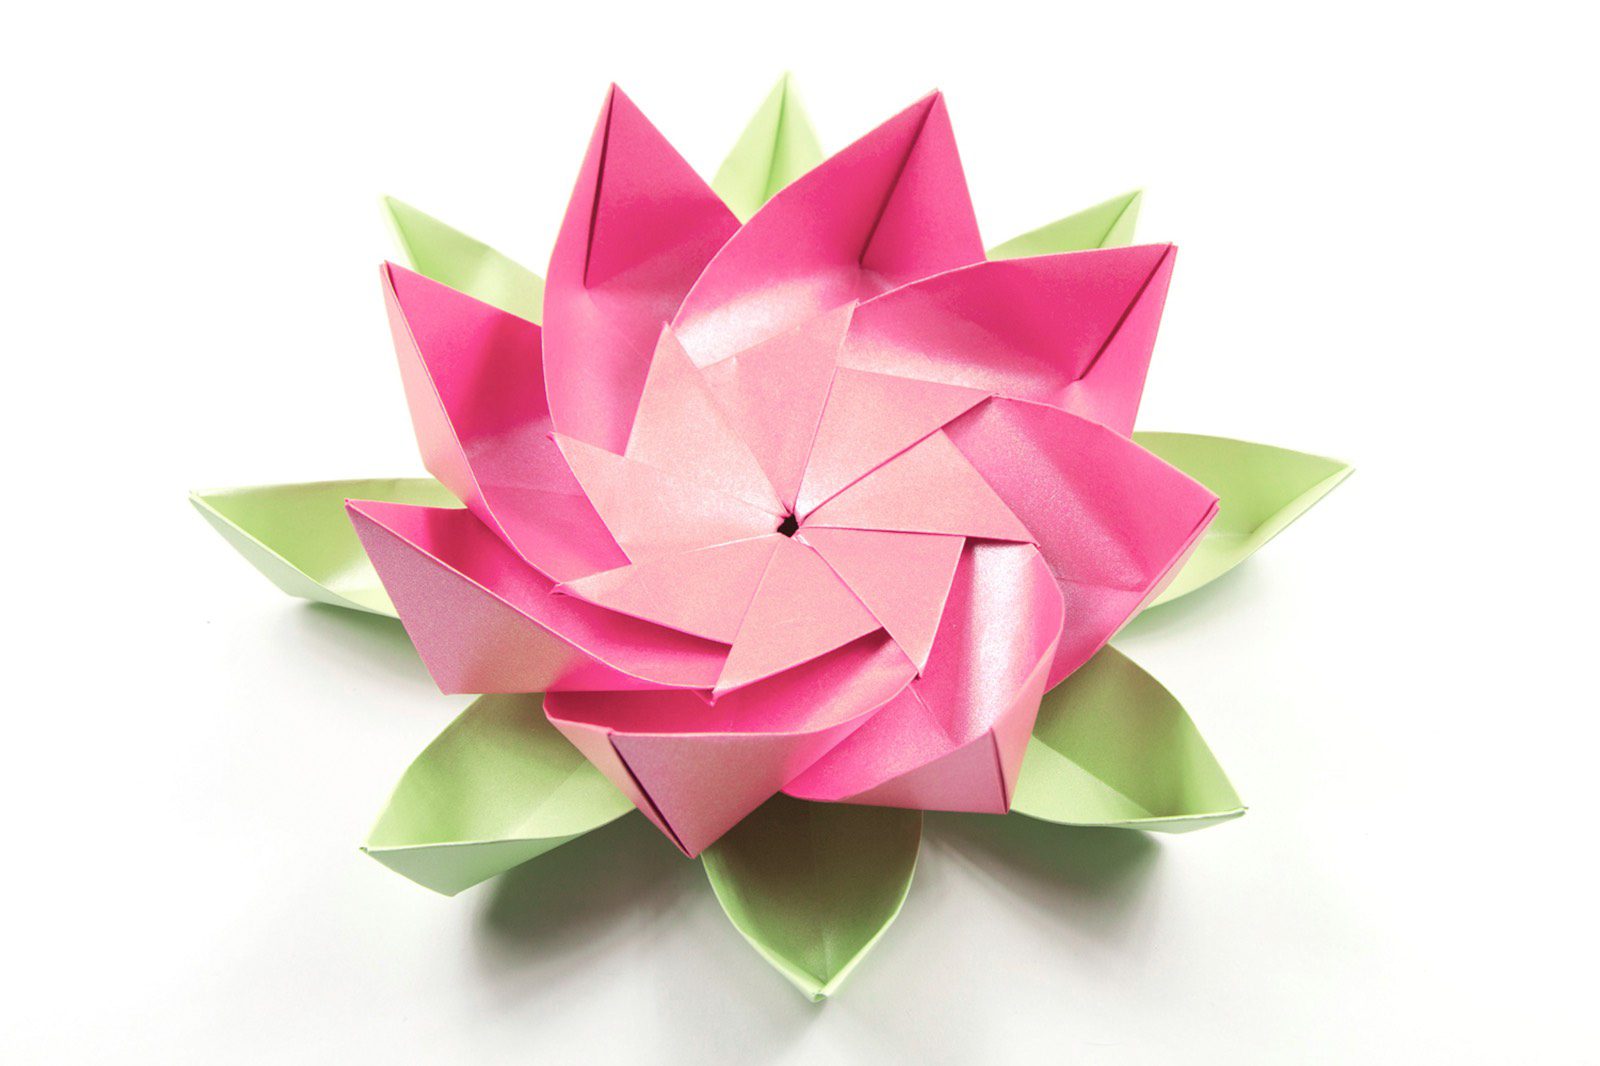 How to Make Origami Lotus Flower (Easy Instructions + Video)